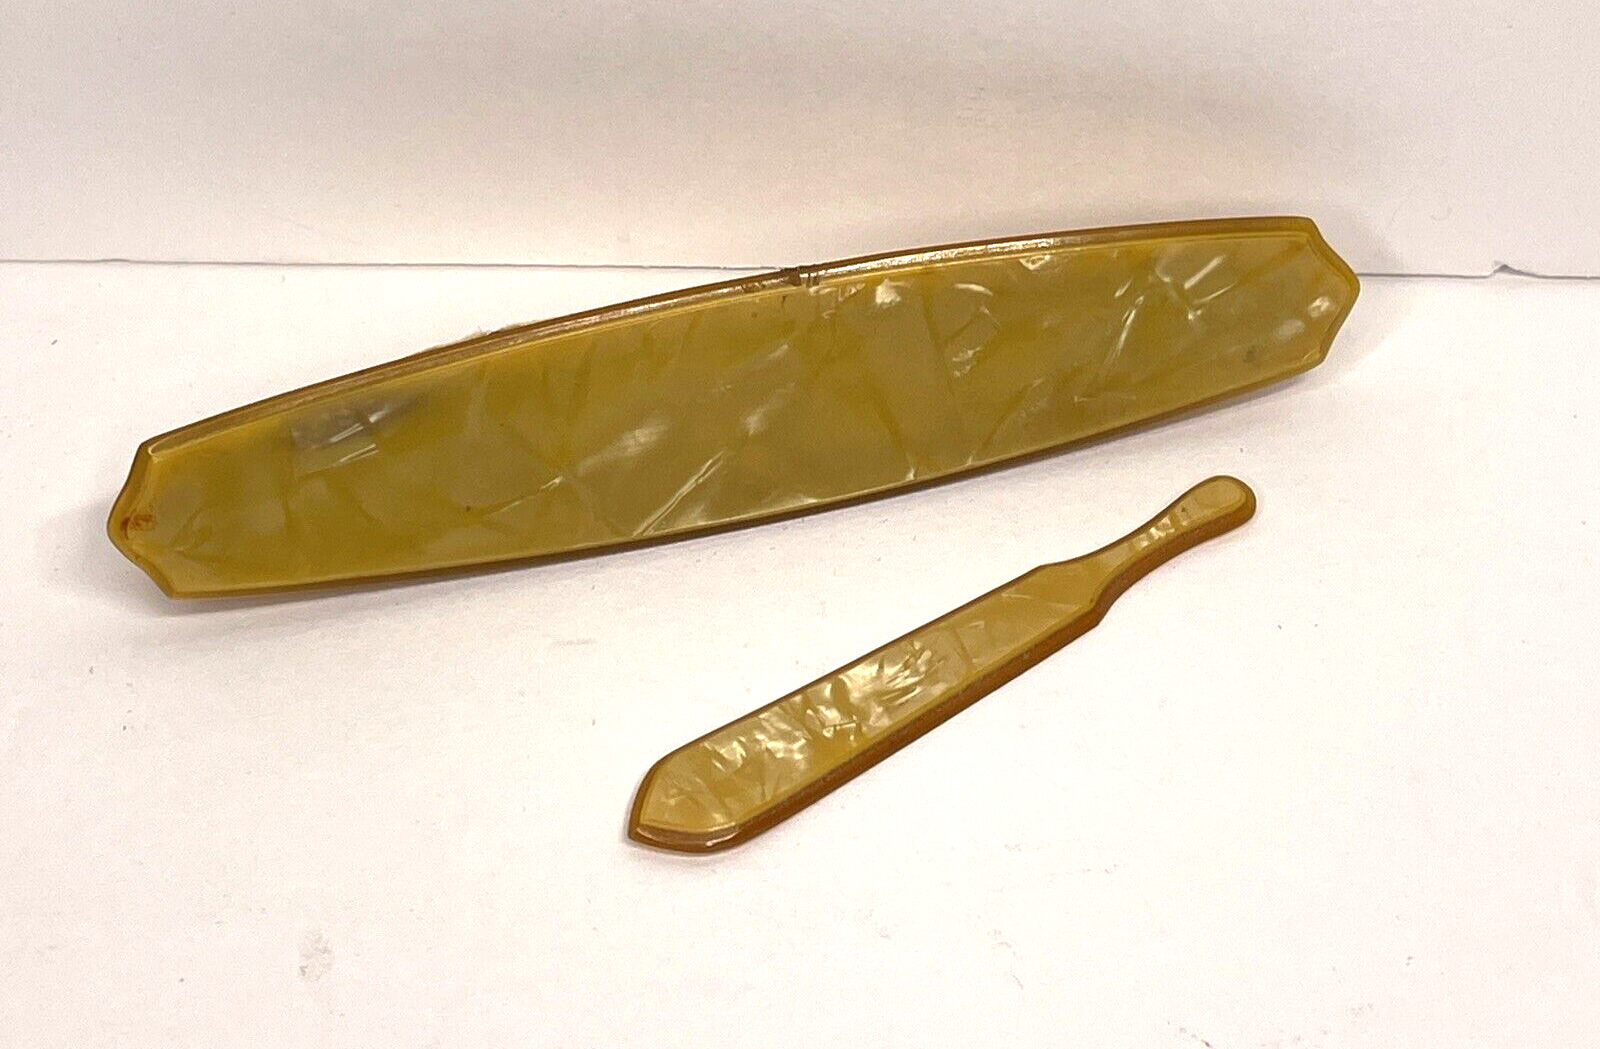 Antique Pearlized Celluloid Bakelite Finger Buff & Cuticle Tool